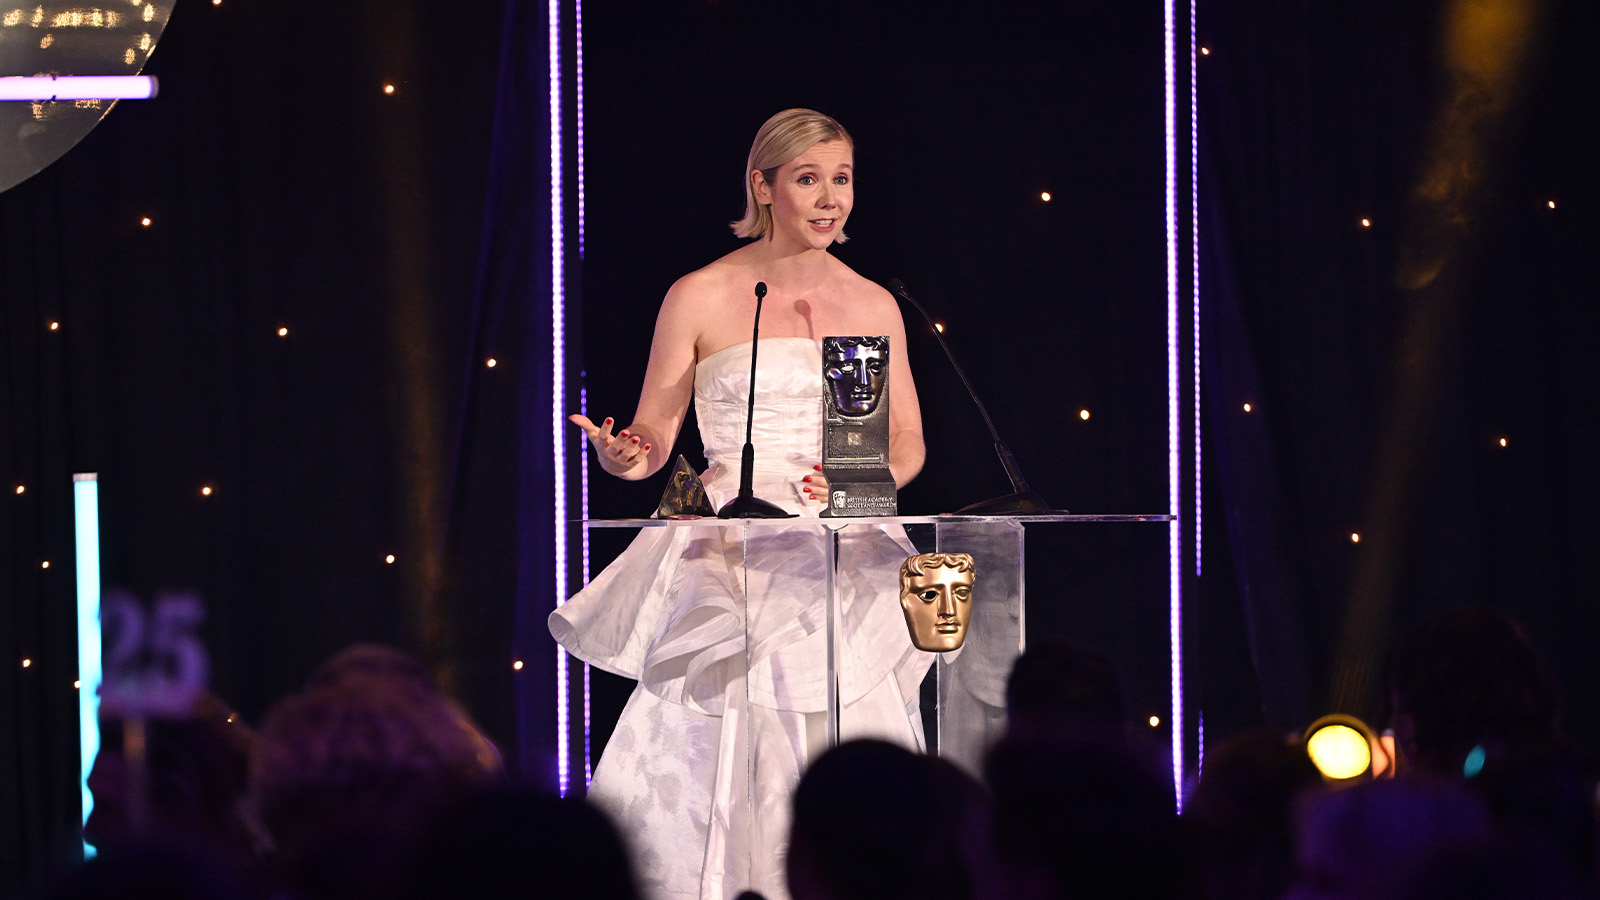 Lauren Lyle accepts the Actress Television Award for 'Karen Pirie' at the 2023 BAFTA Scotland Awards, held at the DoubleTree by Hilton Glasgow Central, on November 19, 2023 in Glasgow, Scotland, U.K (Photo by Jeff Spicer/BAFTA/Getty Images for BAFTA)